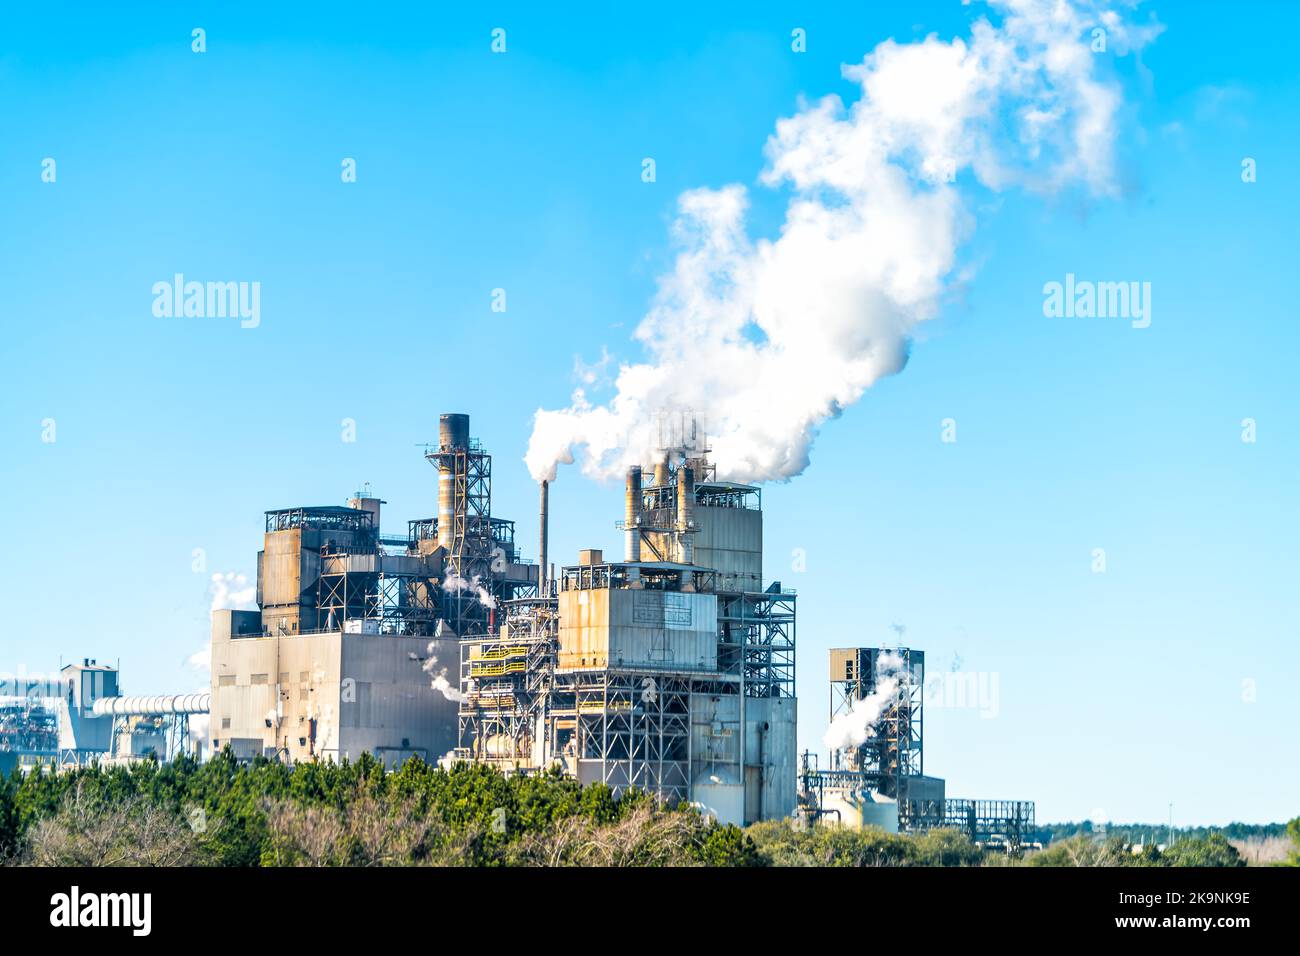 Industrial paper mill factory plant with chimney smokestacks stacks emitting carbon dioxide emission pollution in Georgetown, South Carolina town Stock Photo